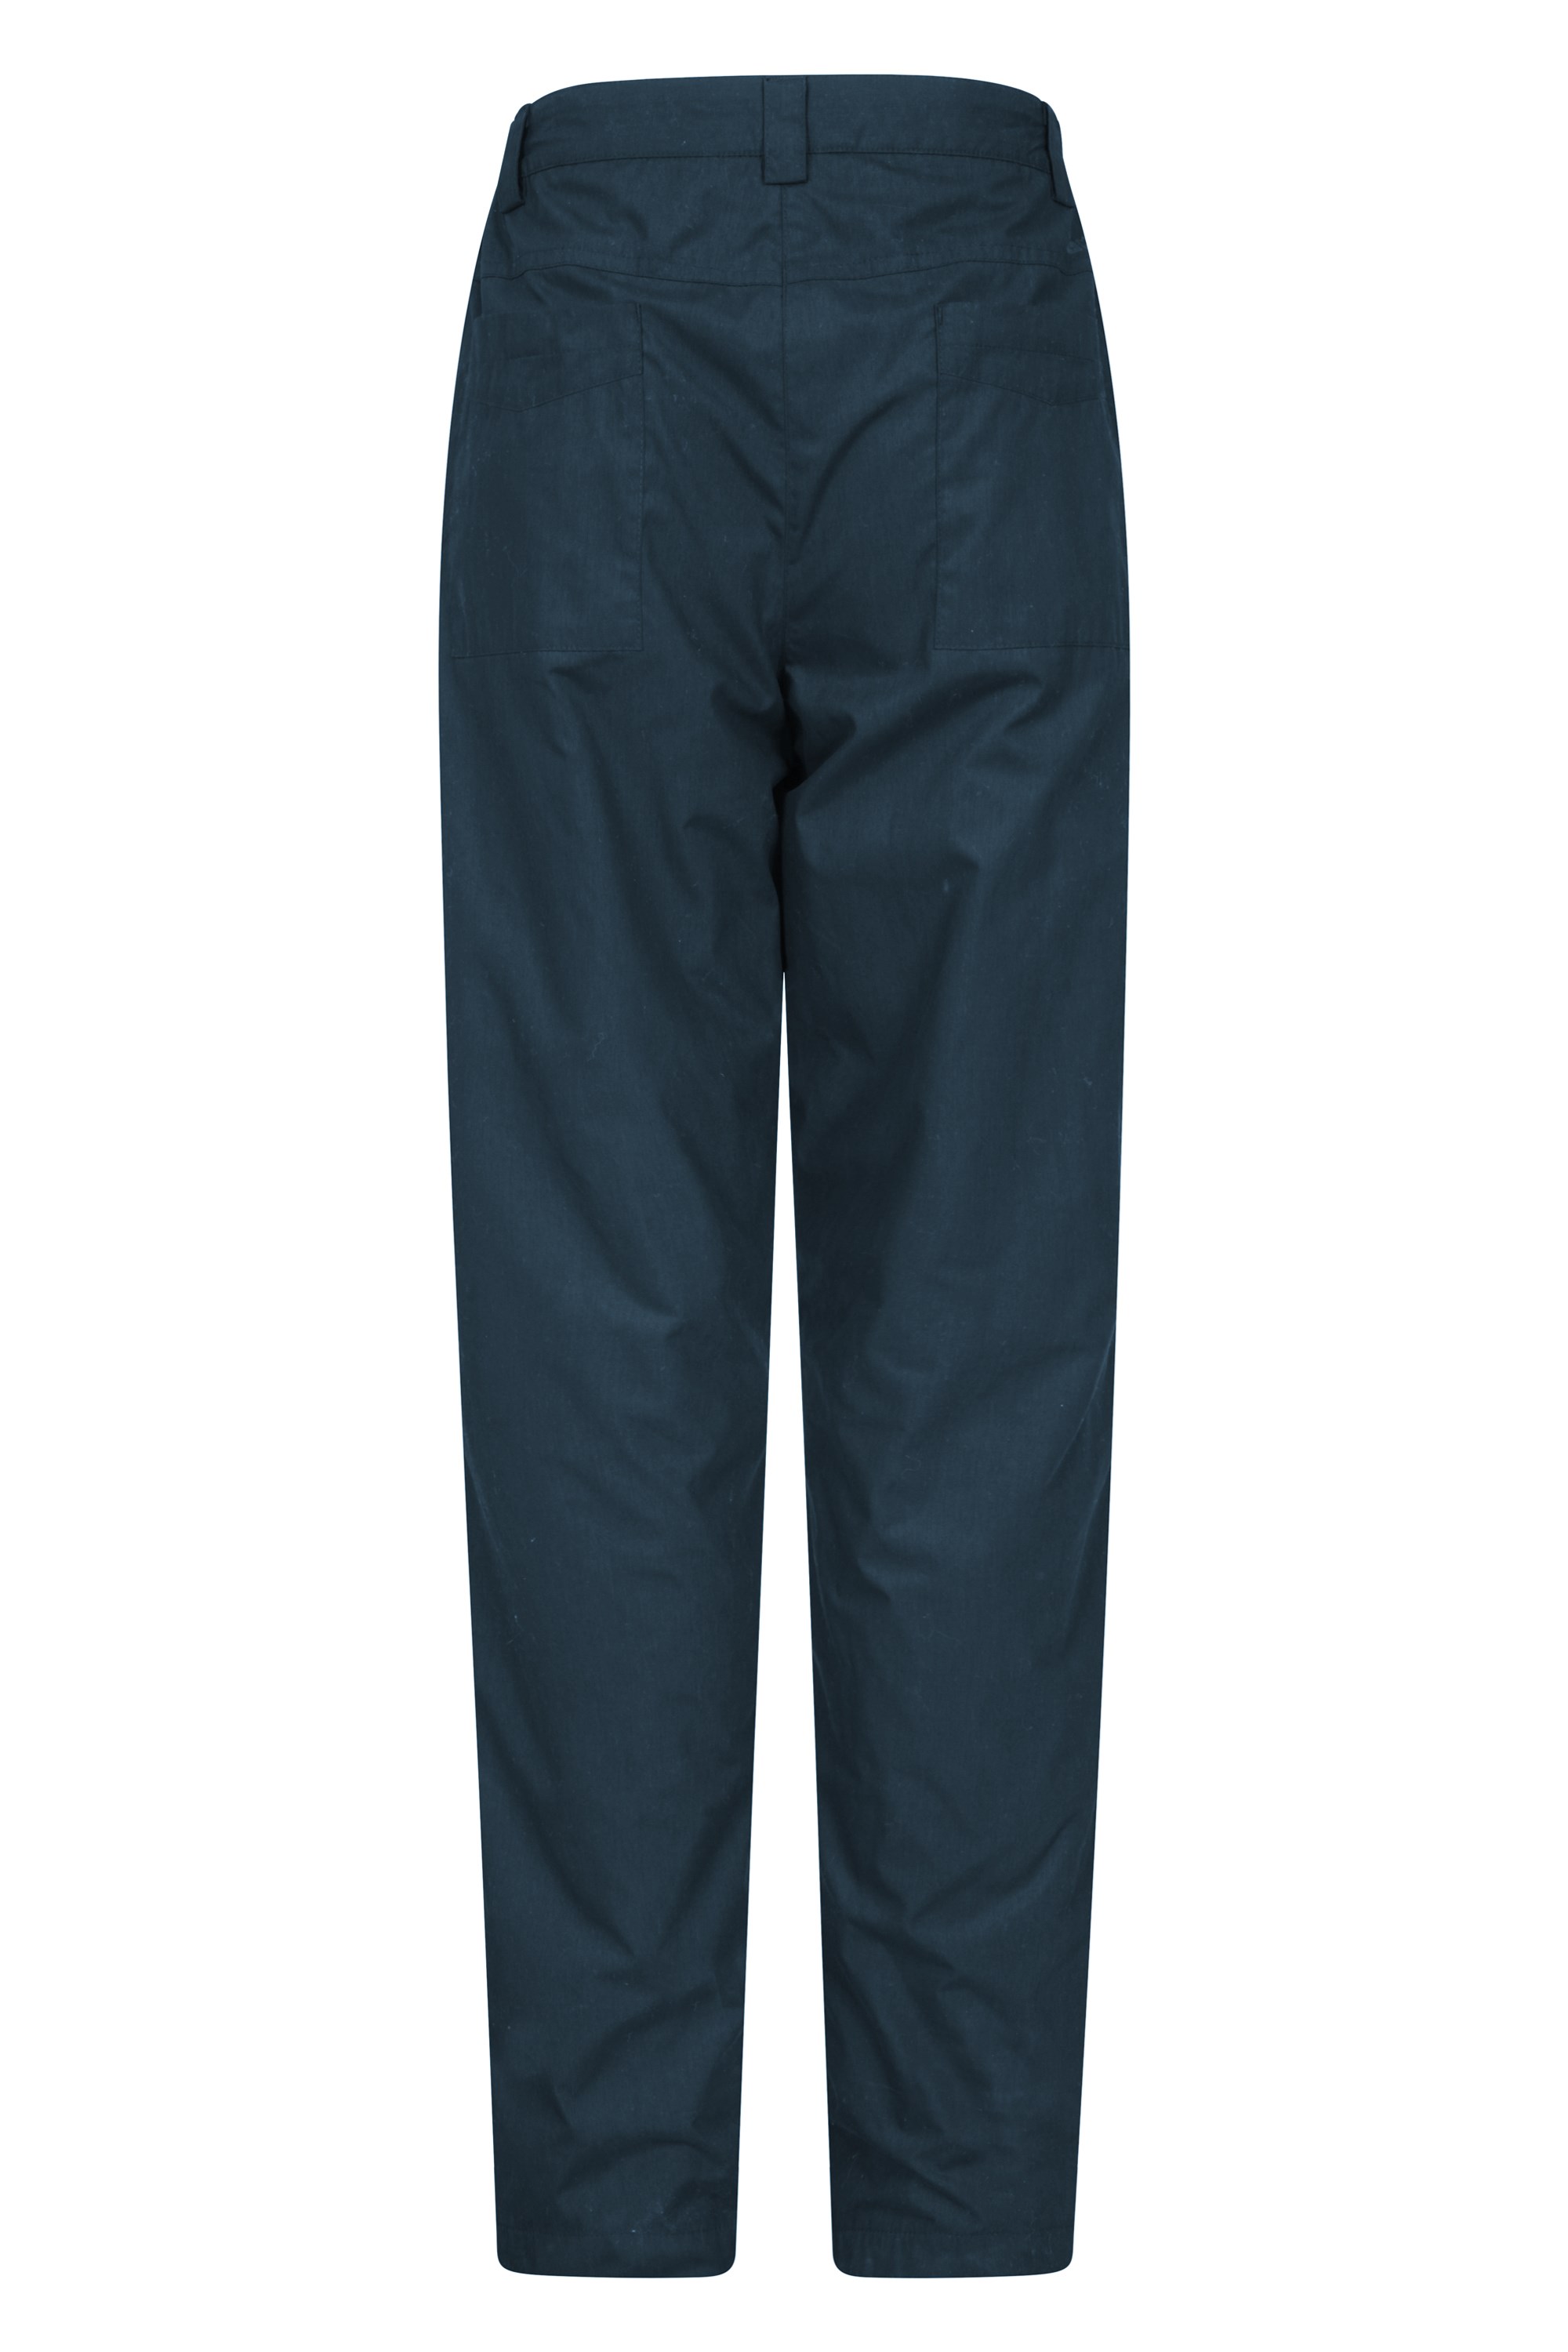 Ladies Thermal Lined Trouser  Chums